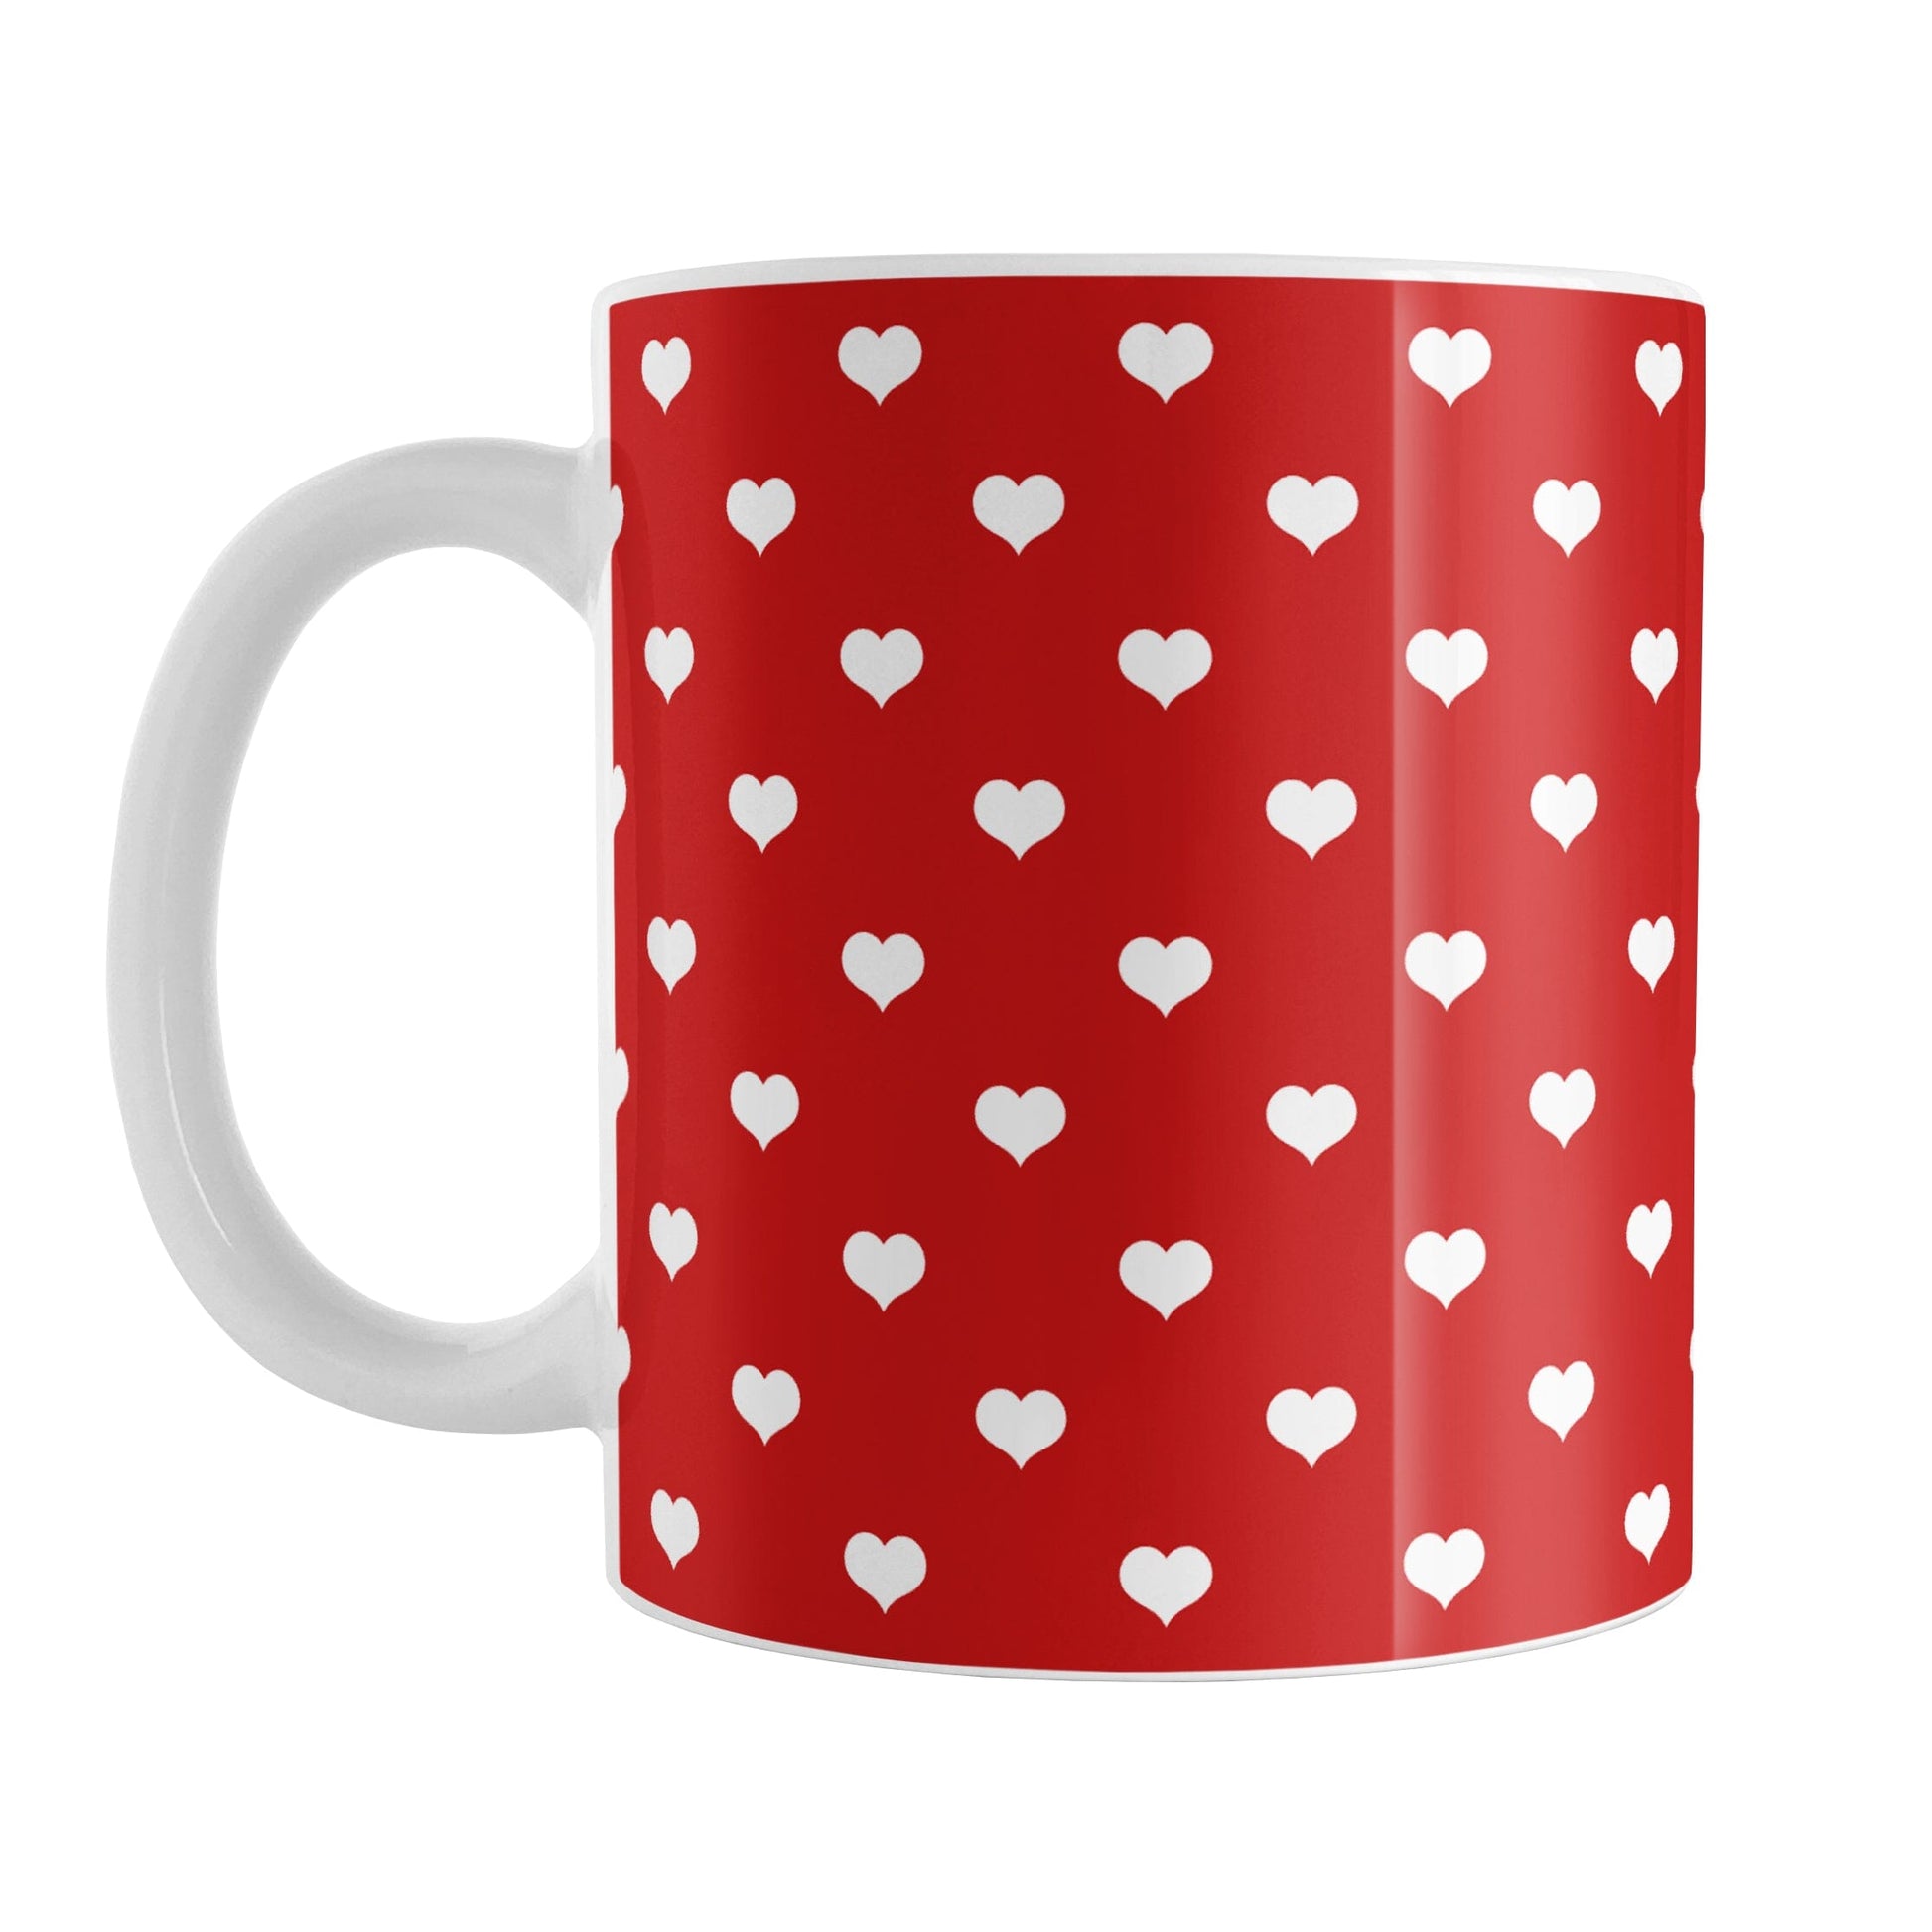 Small White Hearts Pattern Red Mug (11oz) at Amy's Coffee Mugs. A ceramic coffee mug designed with a pattern of small white hearts over a red background color that wraps around the mug to the handle. It's the perfect mug for anyone who loves hearts and the color red.